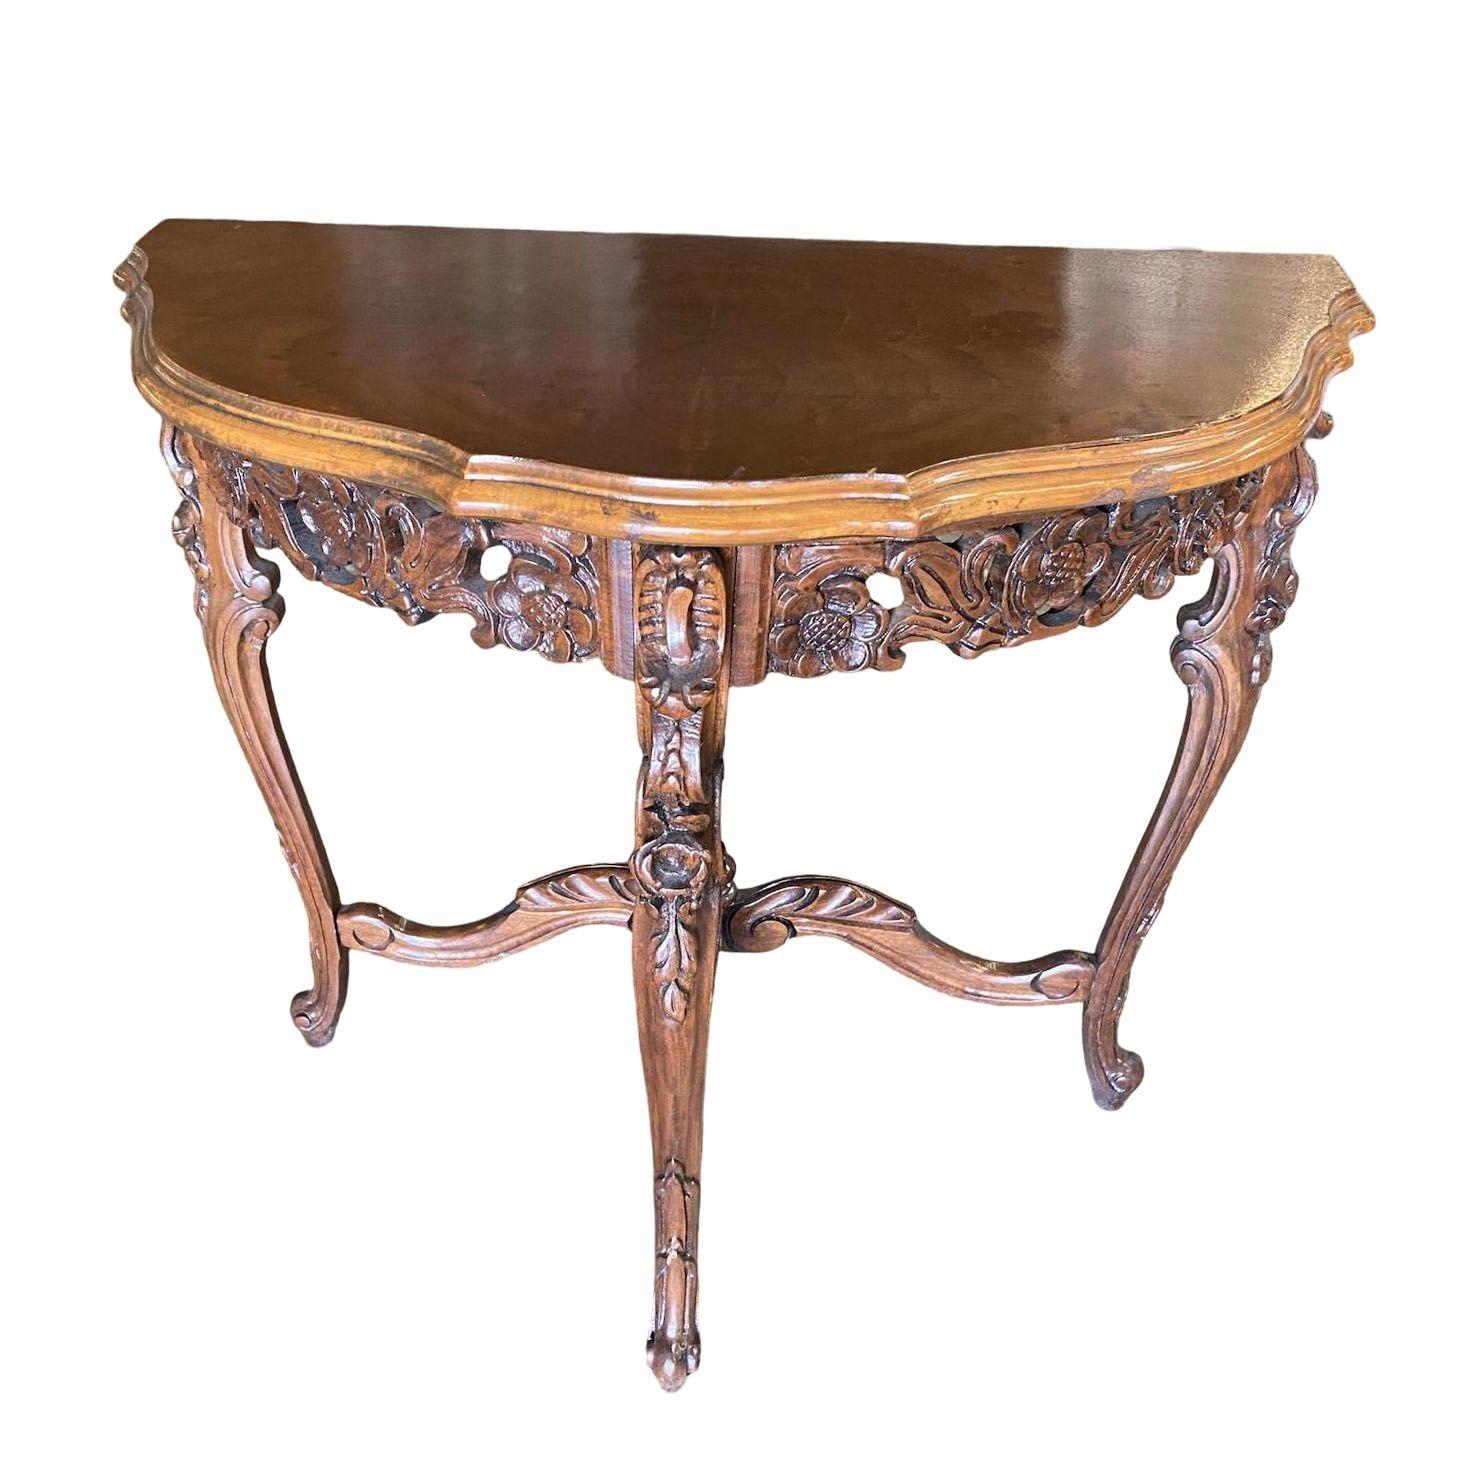 This beautiful Console Table is made out of solid wood with walnut veneer, and it is in good condition. The Table has a Traditional half moon shape, hand carving, Queen Anne feet, and light dark stain finish.